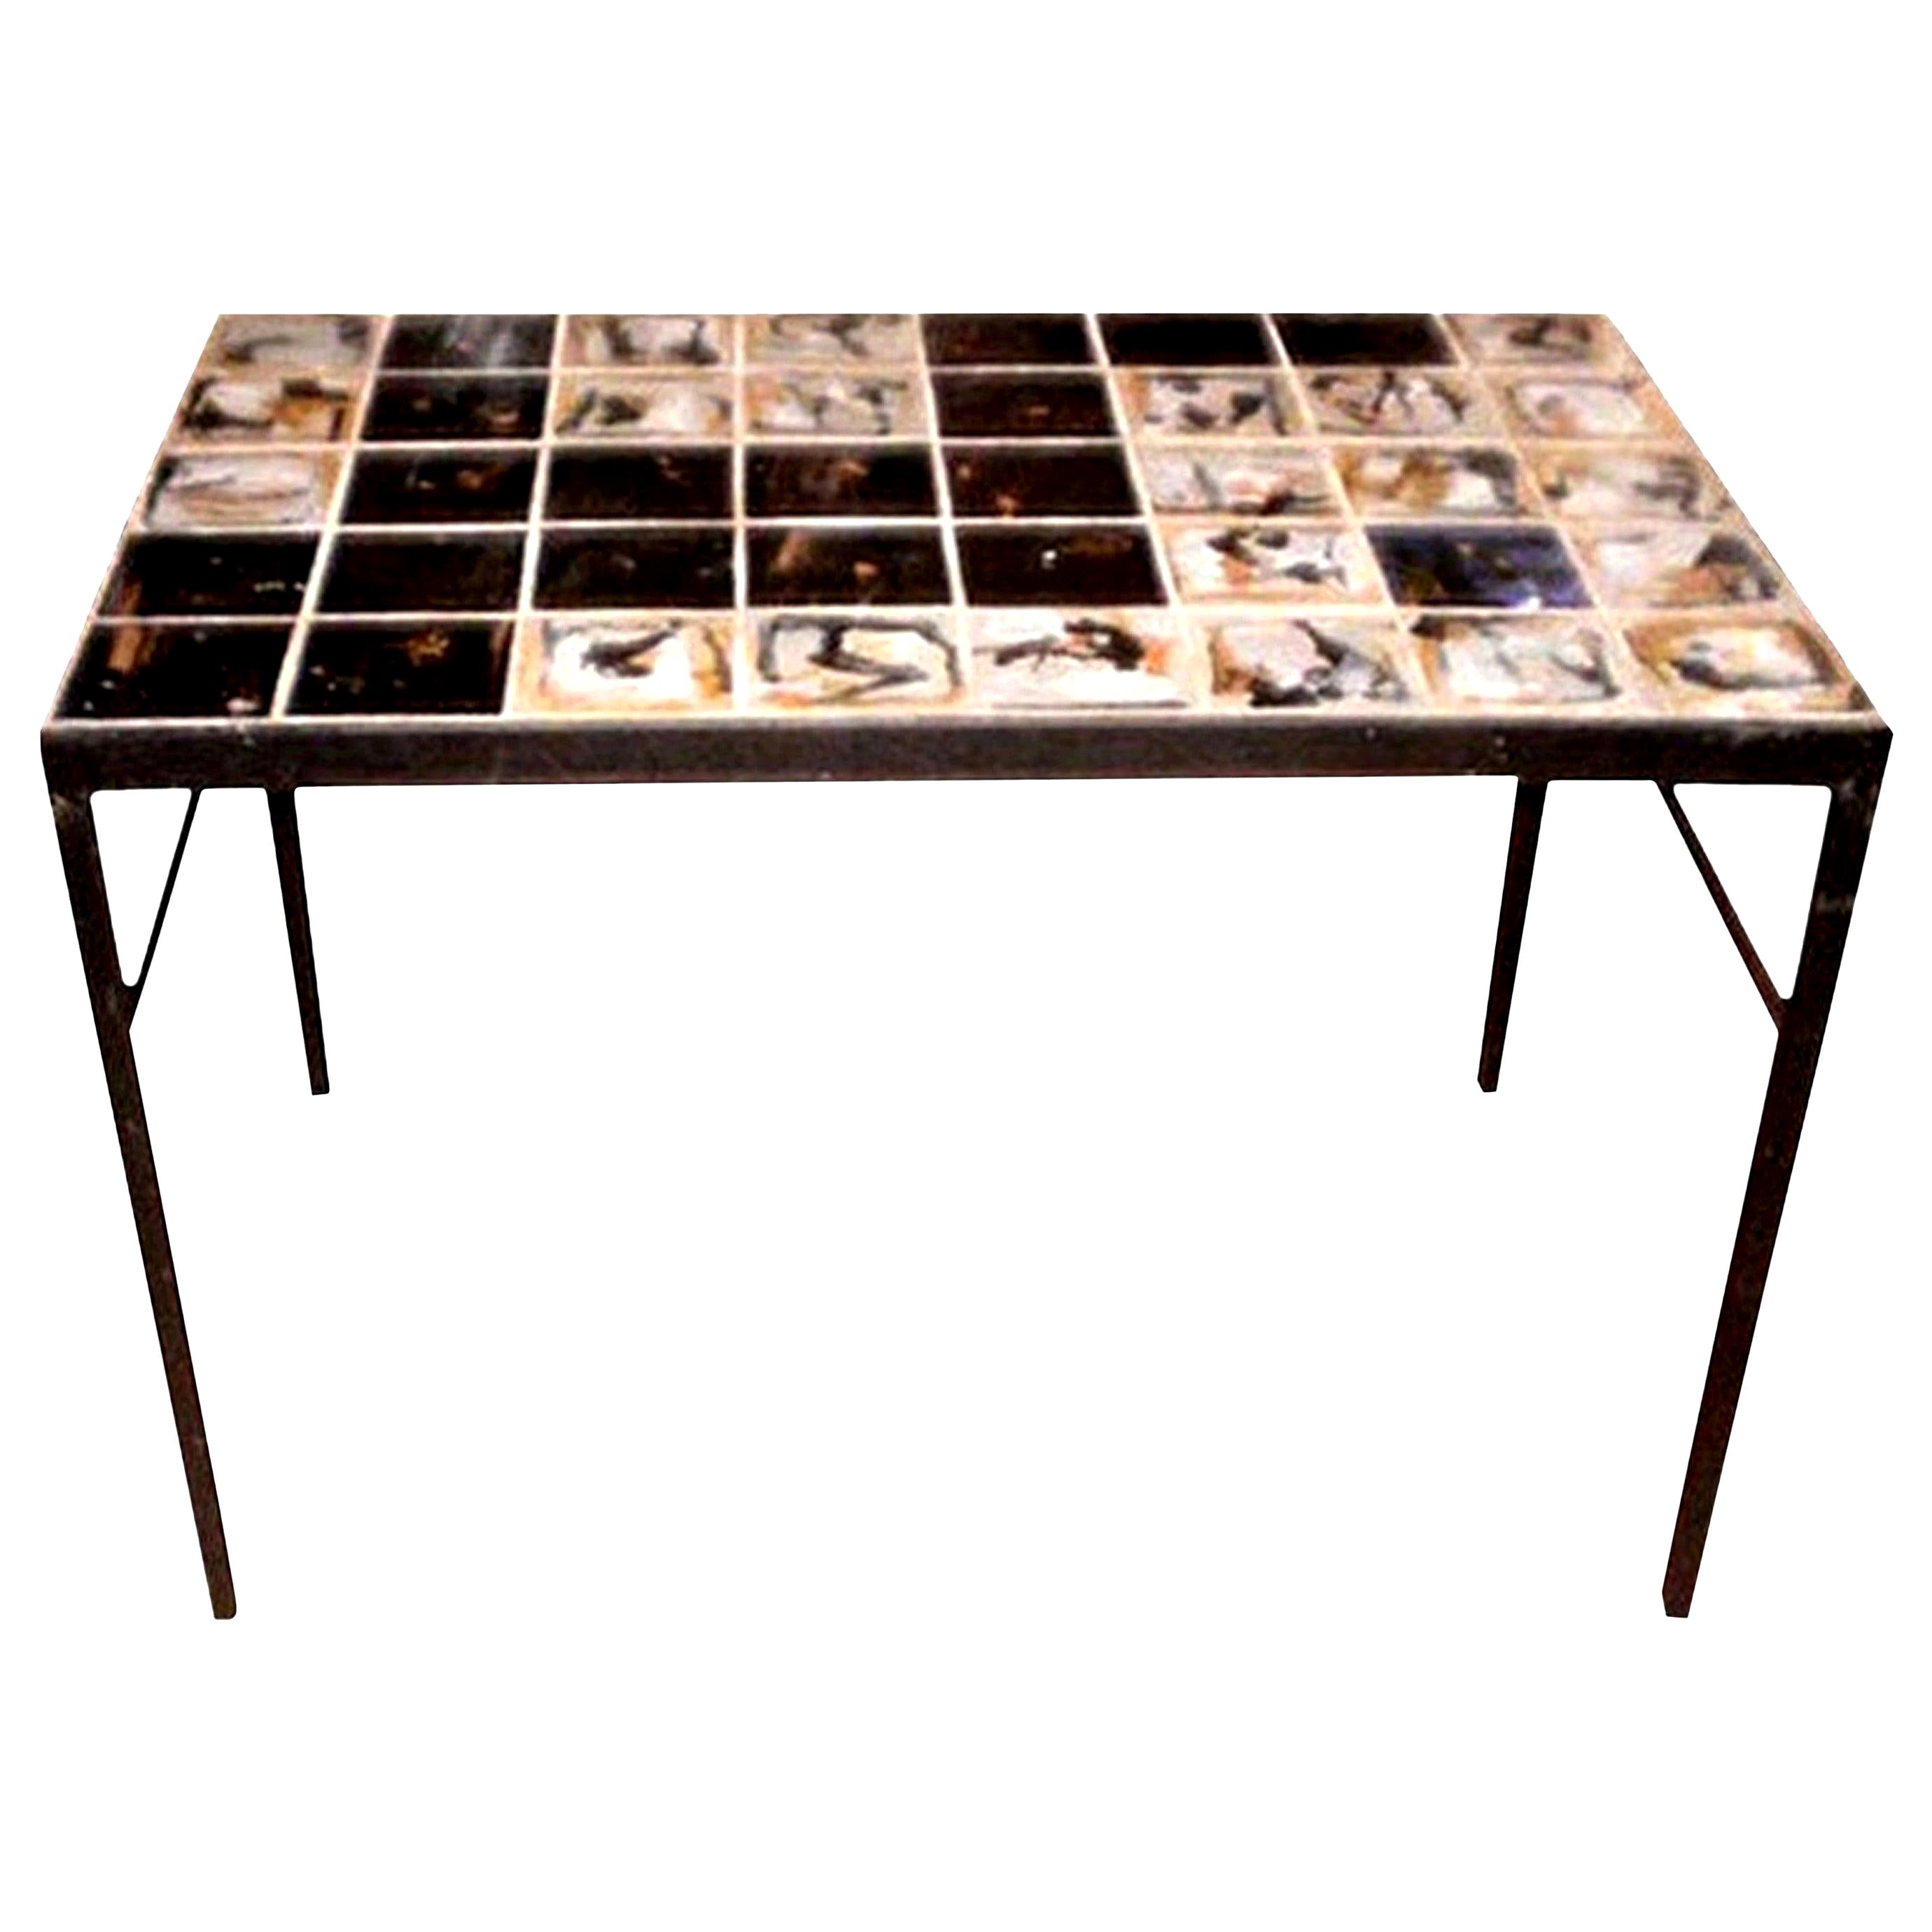 Mid-Century Modern Tile Topped Cocktail Table, Roger Capron Style